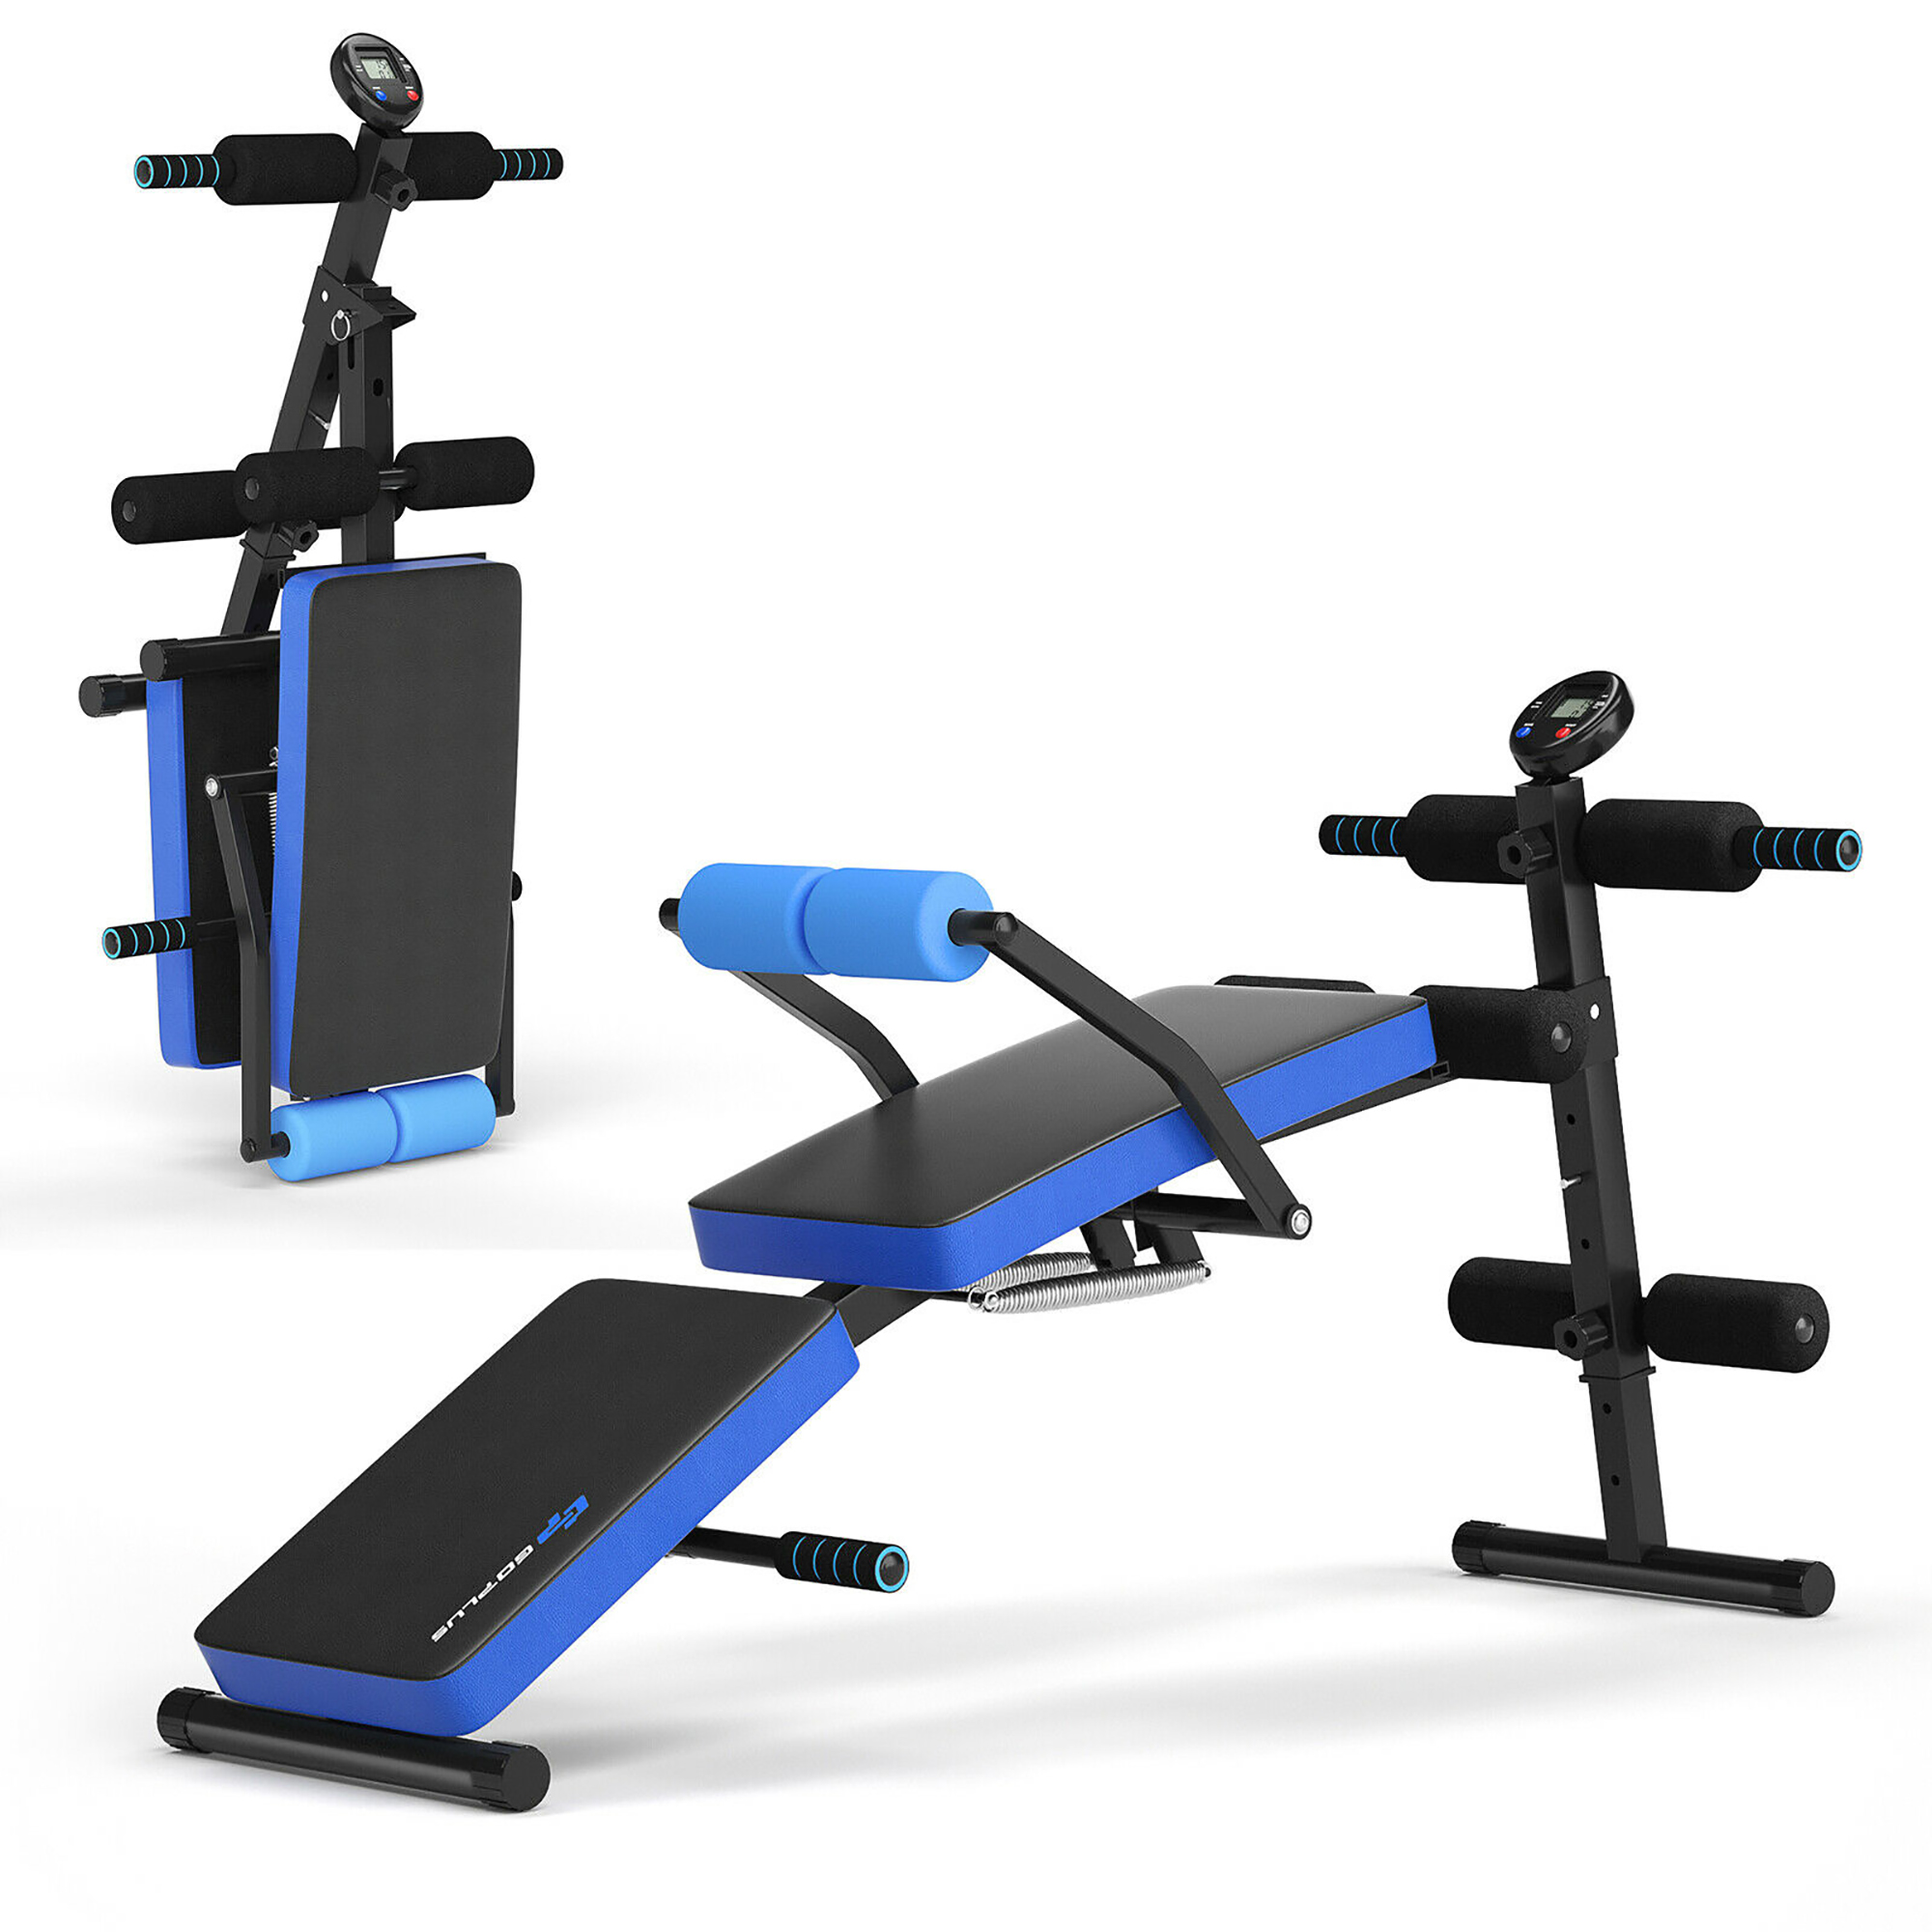 Costway Goplus Multi-Functional Foldable Weight Bench Adjustable Sit-up Board w/ Monitor Blue